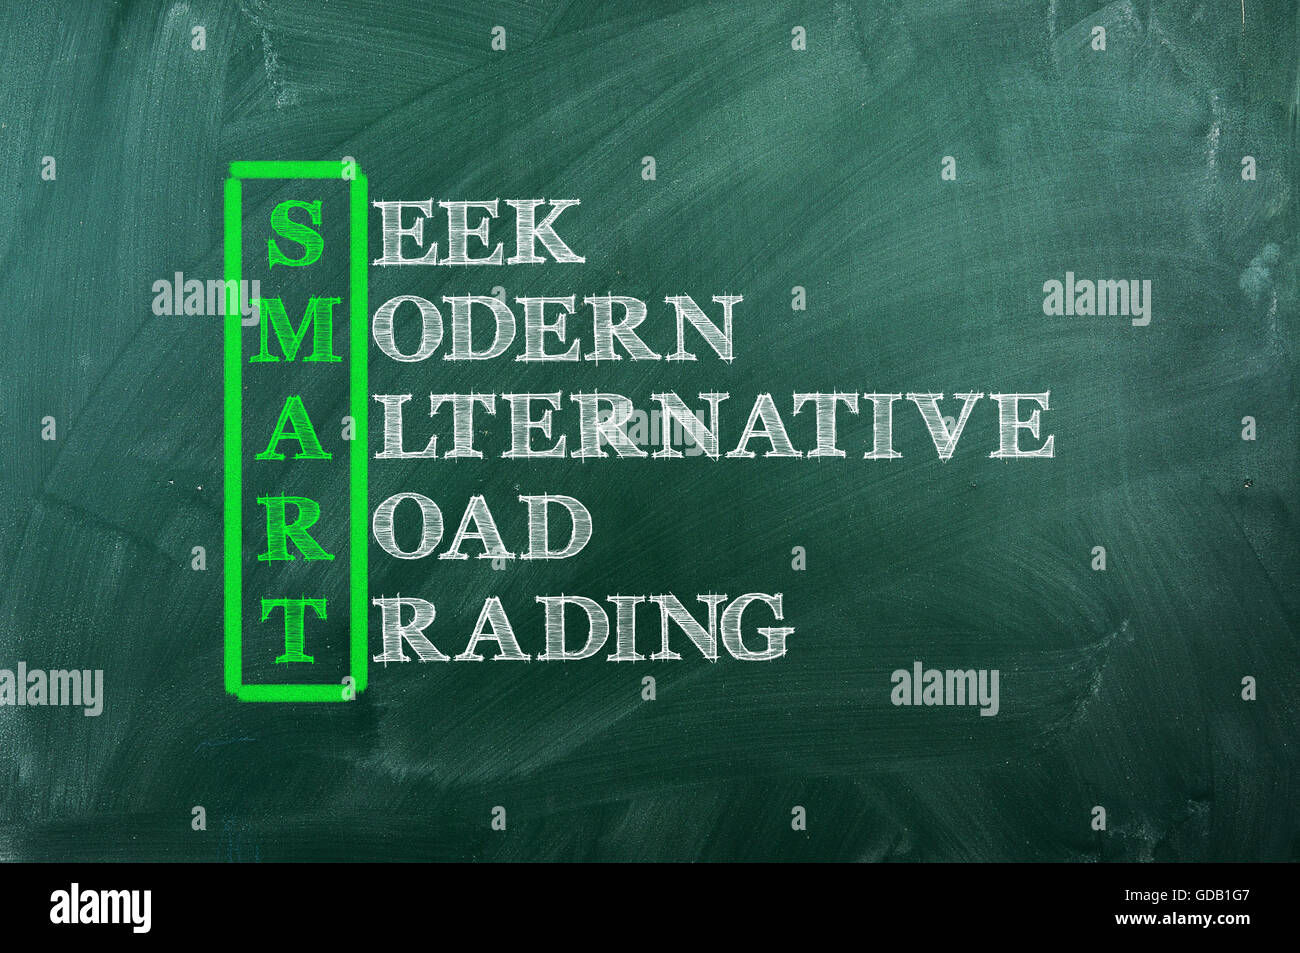 acronym of Smart and other relevant words on green chalkboard Stock Photo